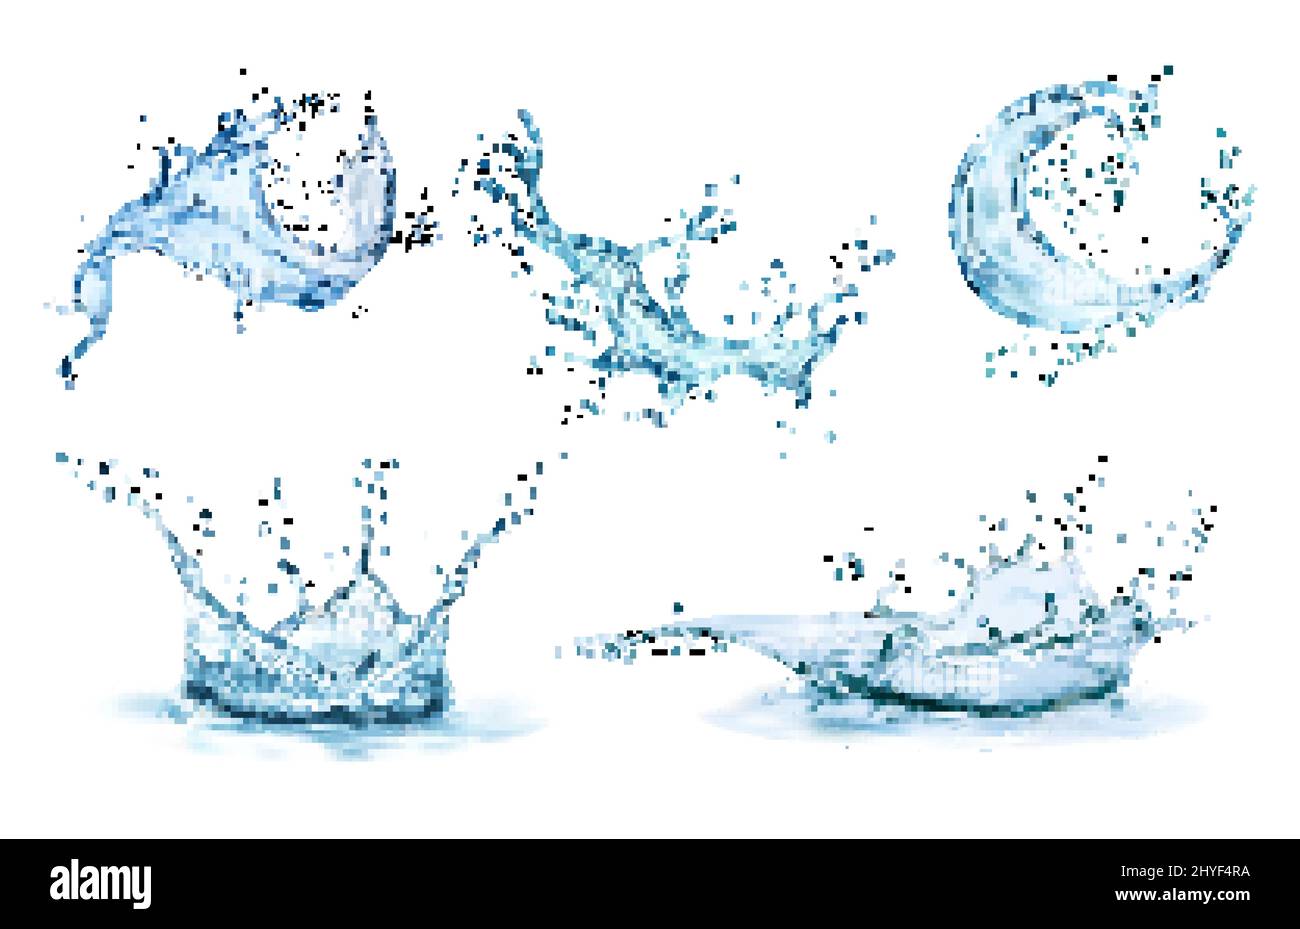 Blue fresh water wave effect elements PNG and Clipart